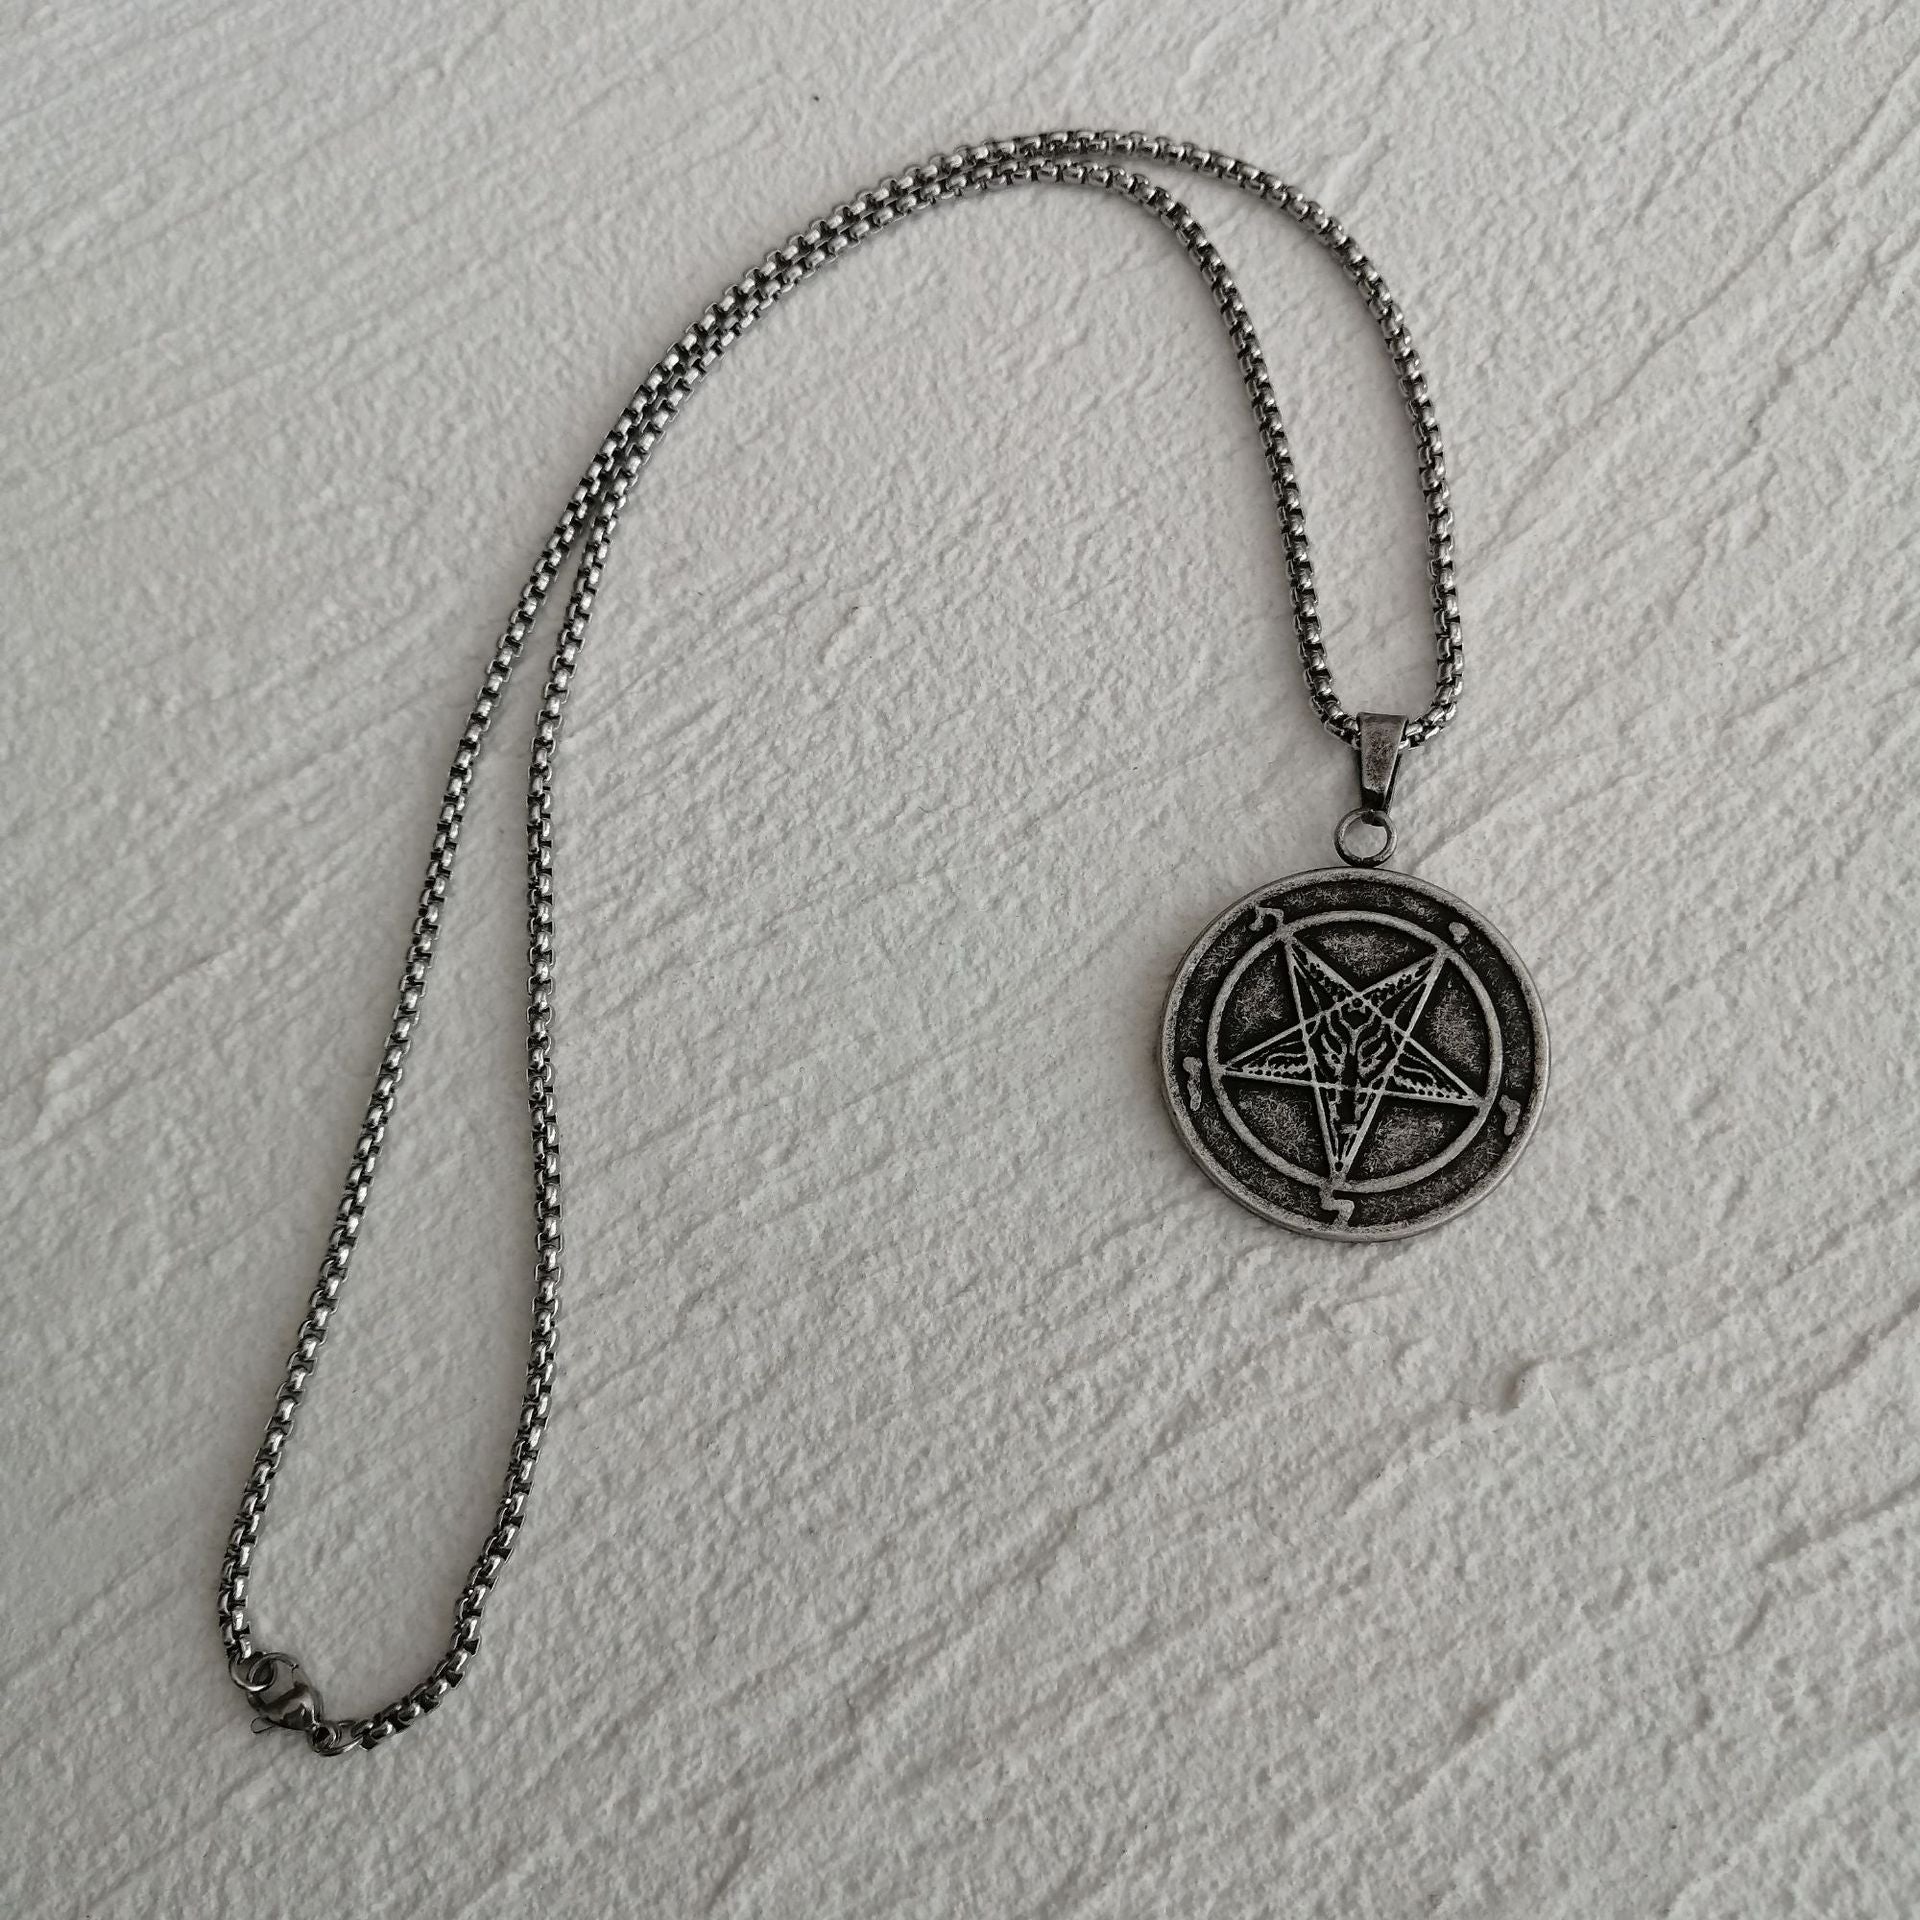 baphomet and sigil of lucifer necklace two